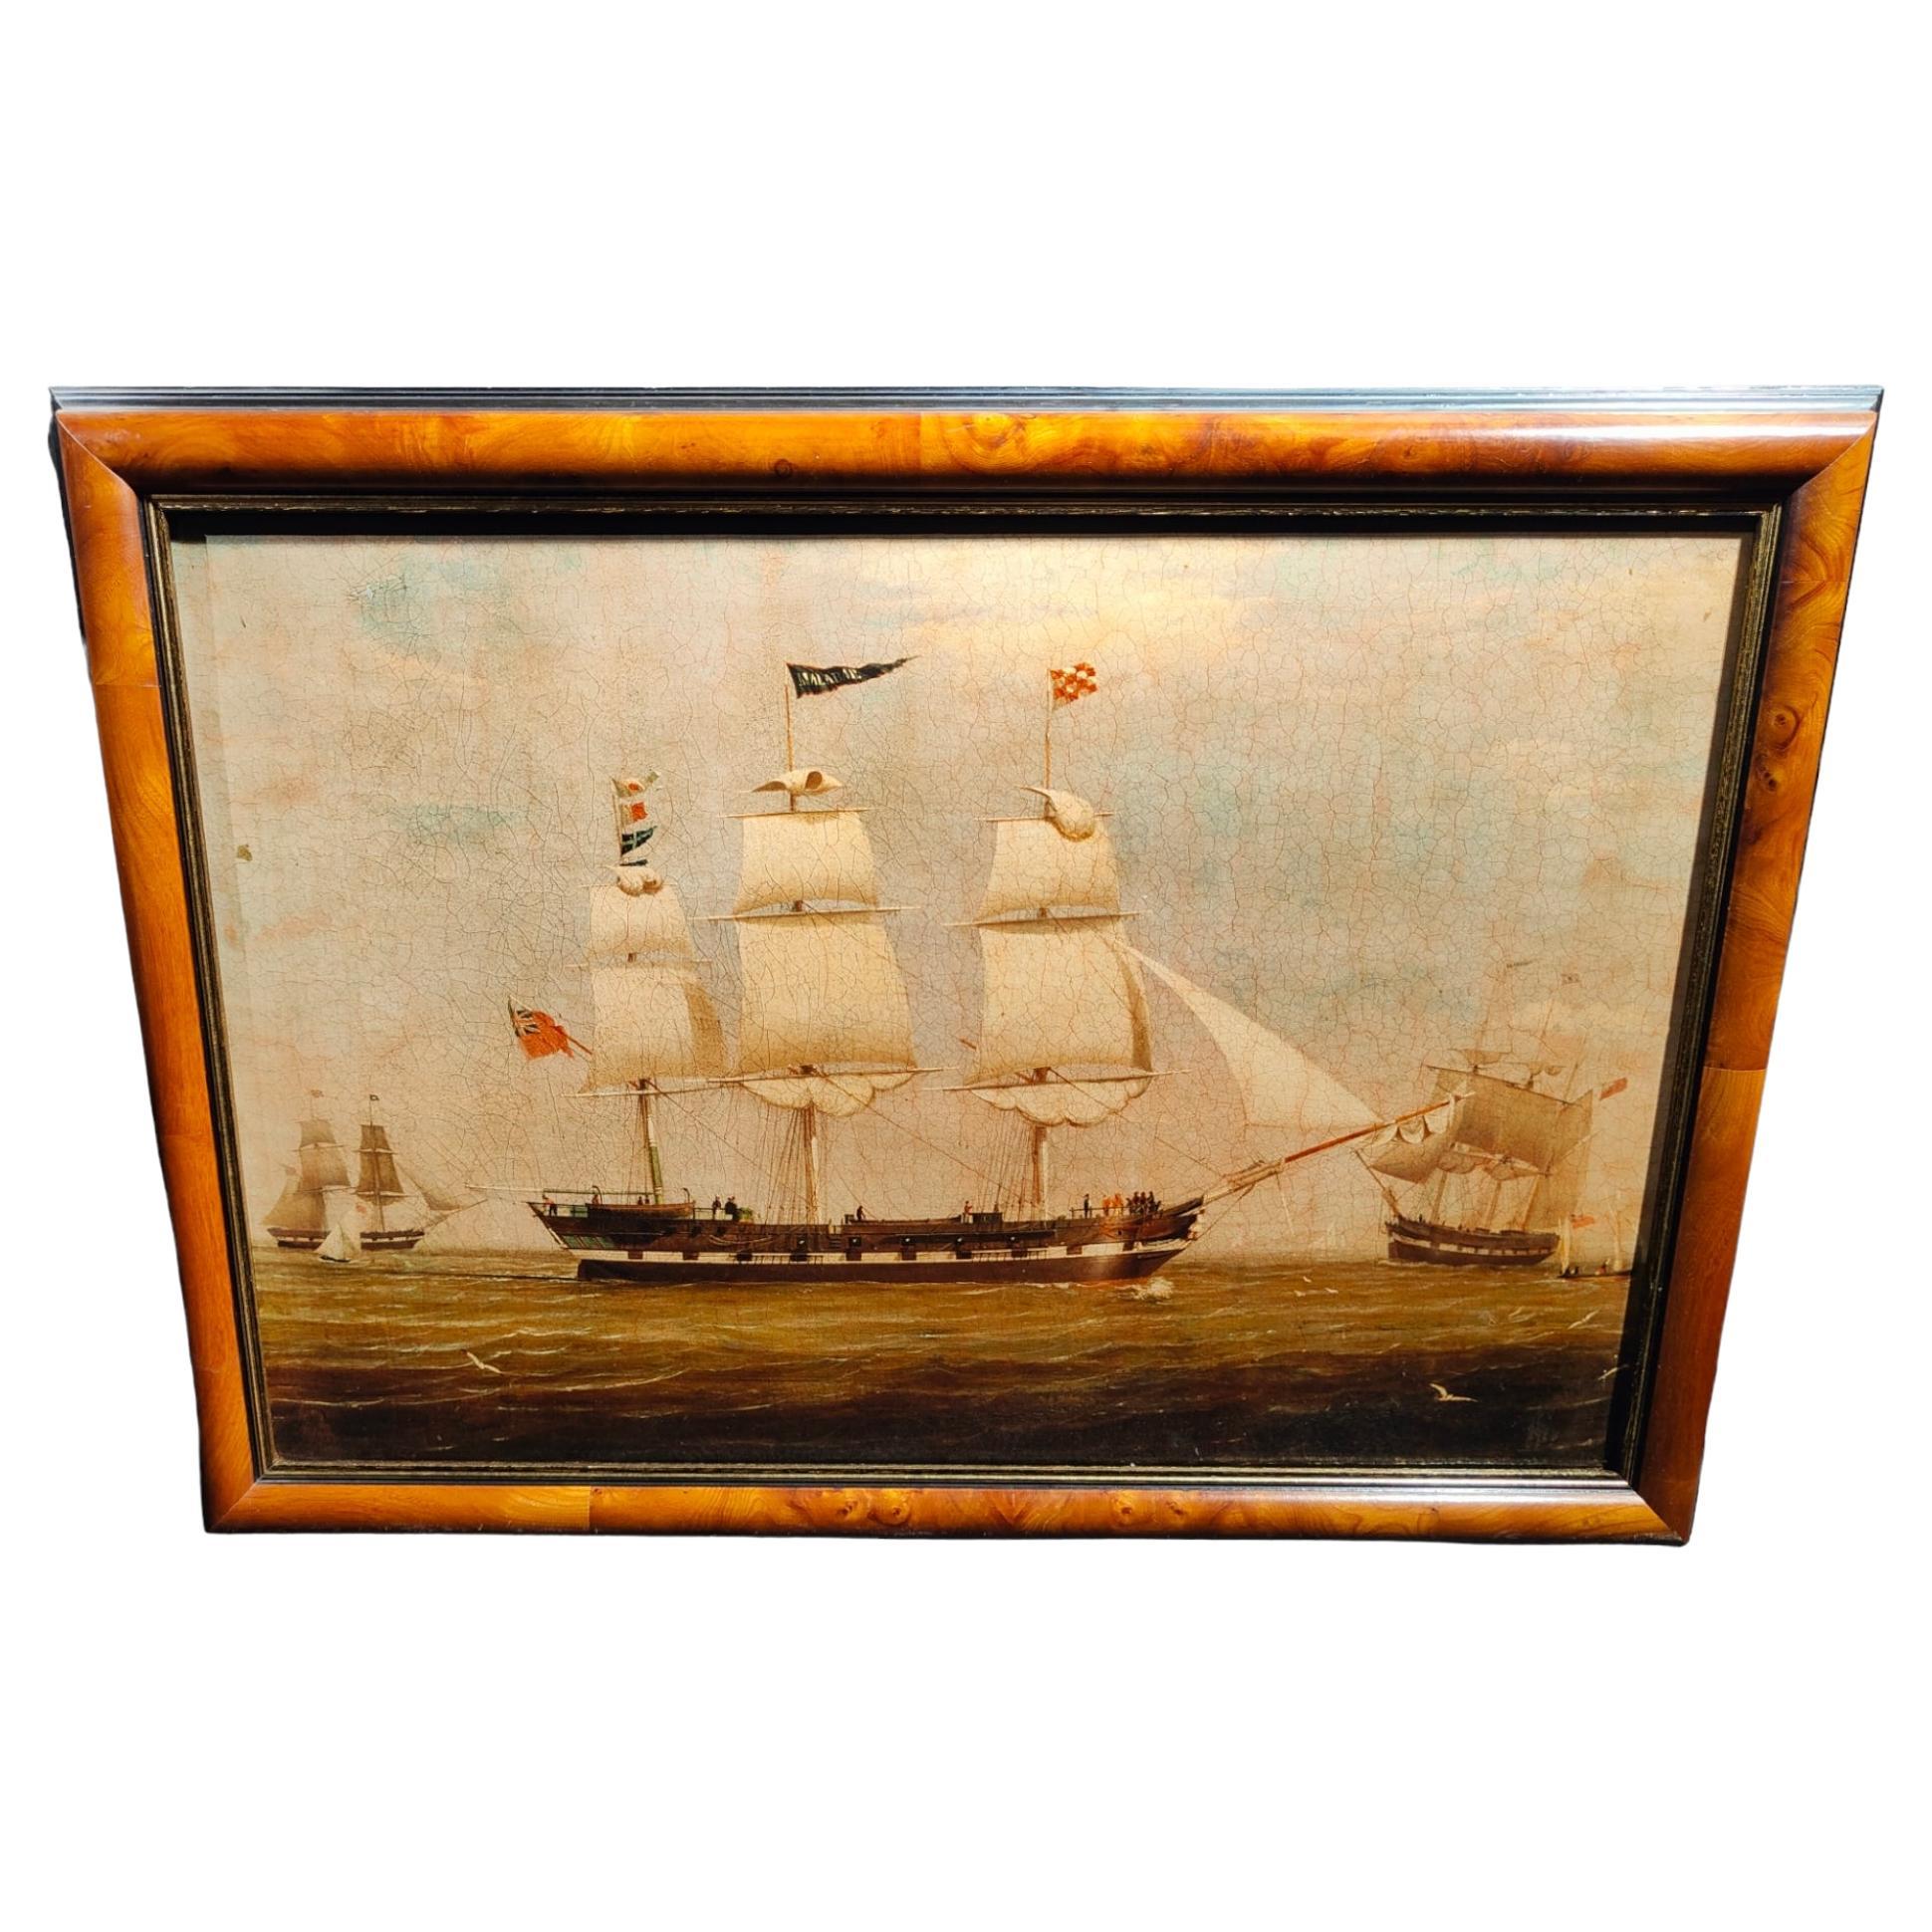 Decorative Oil with Boat 20th Century